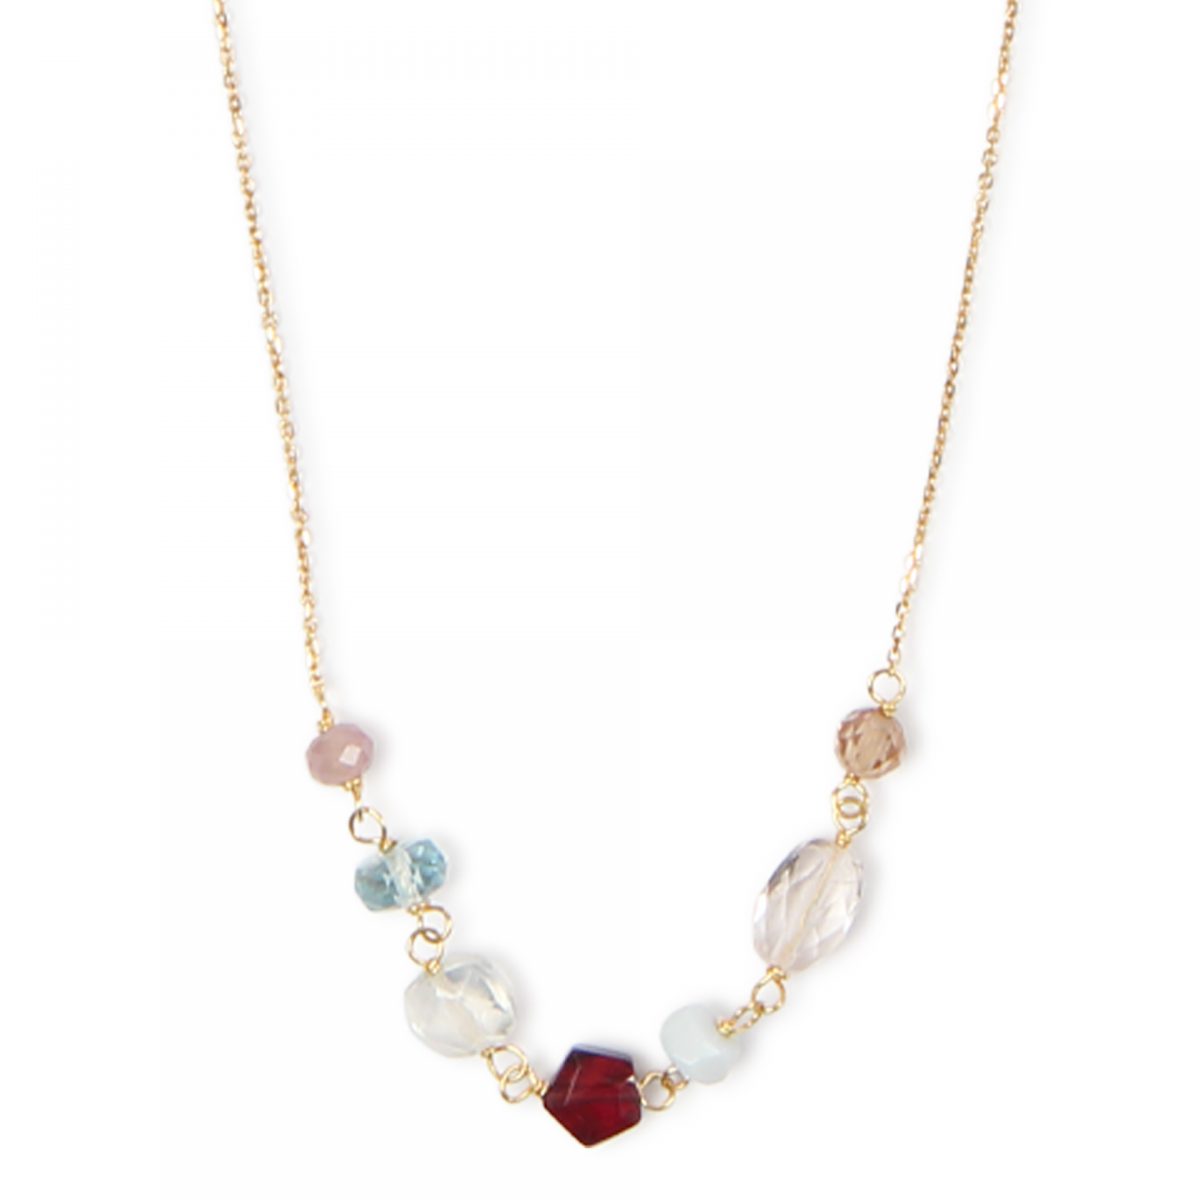 swp_necklace_20_241